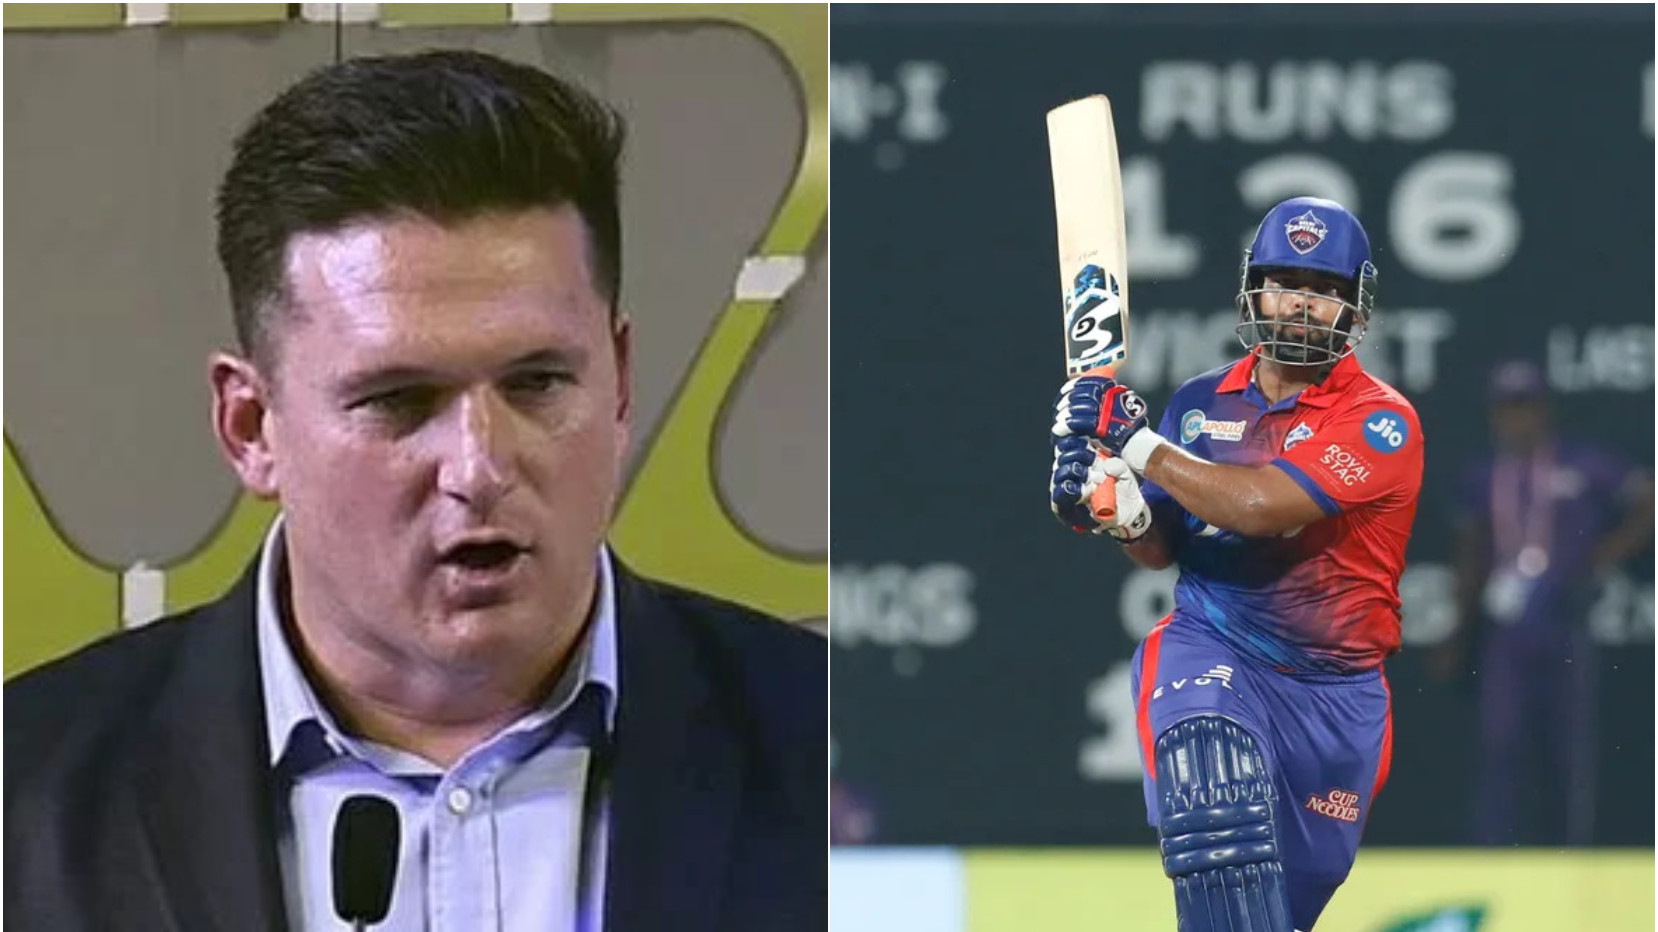 IPL 2022: “Get him up to No.3 and give him more time”, Graeme Smith calls for Rishabh Pant's batting promotion